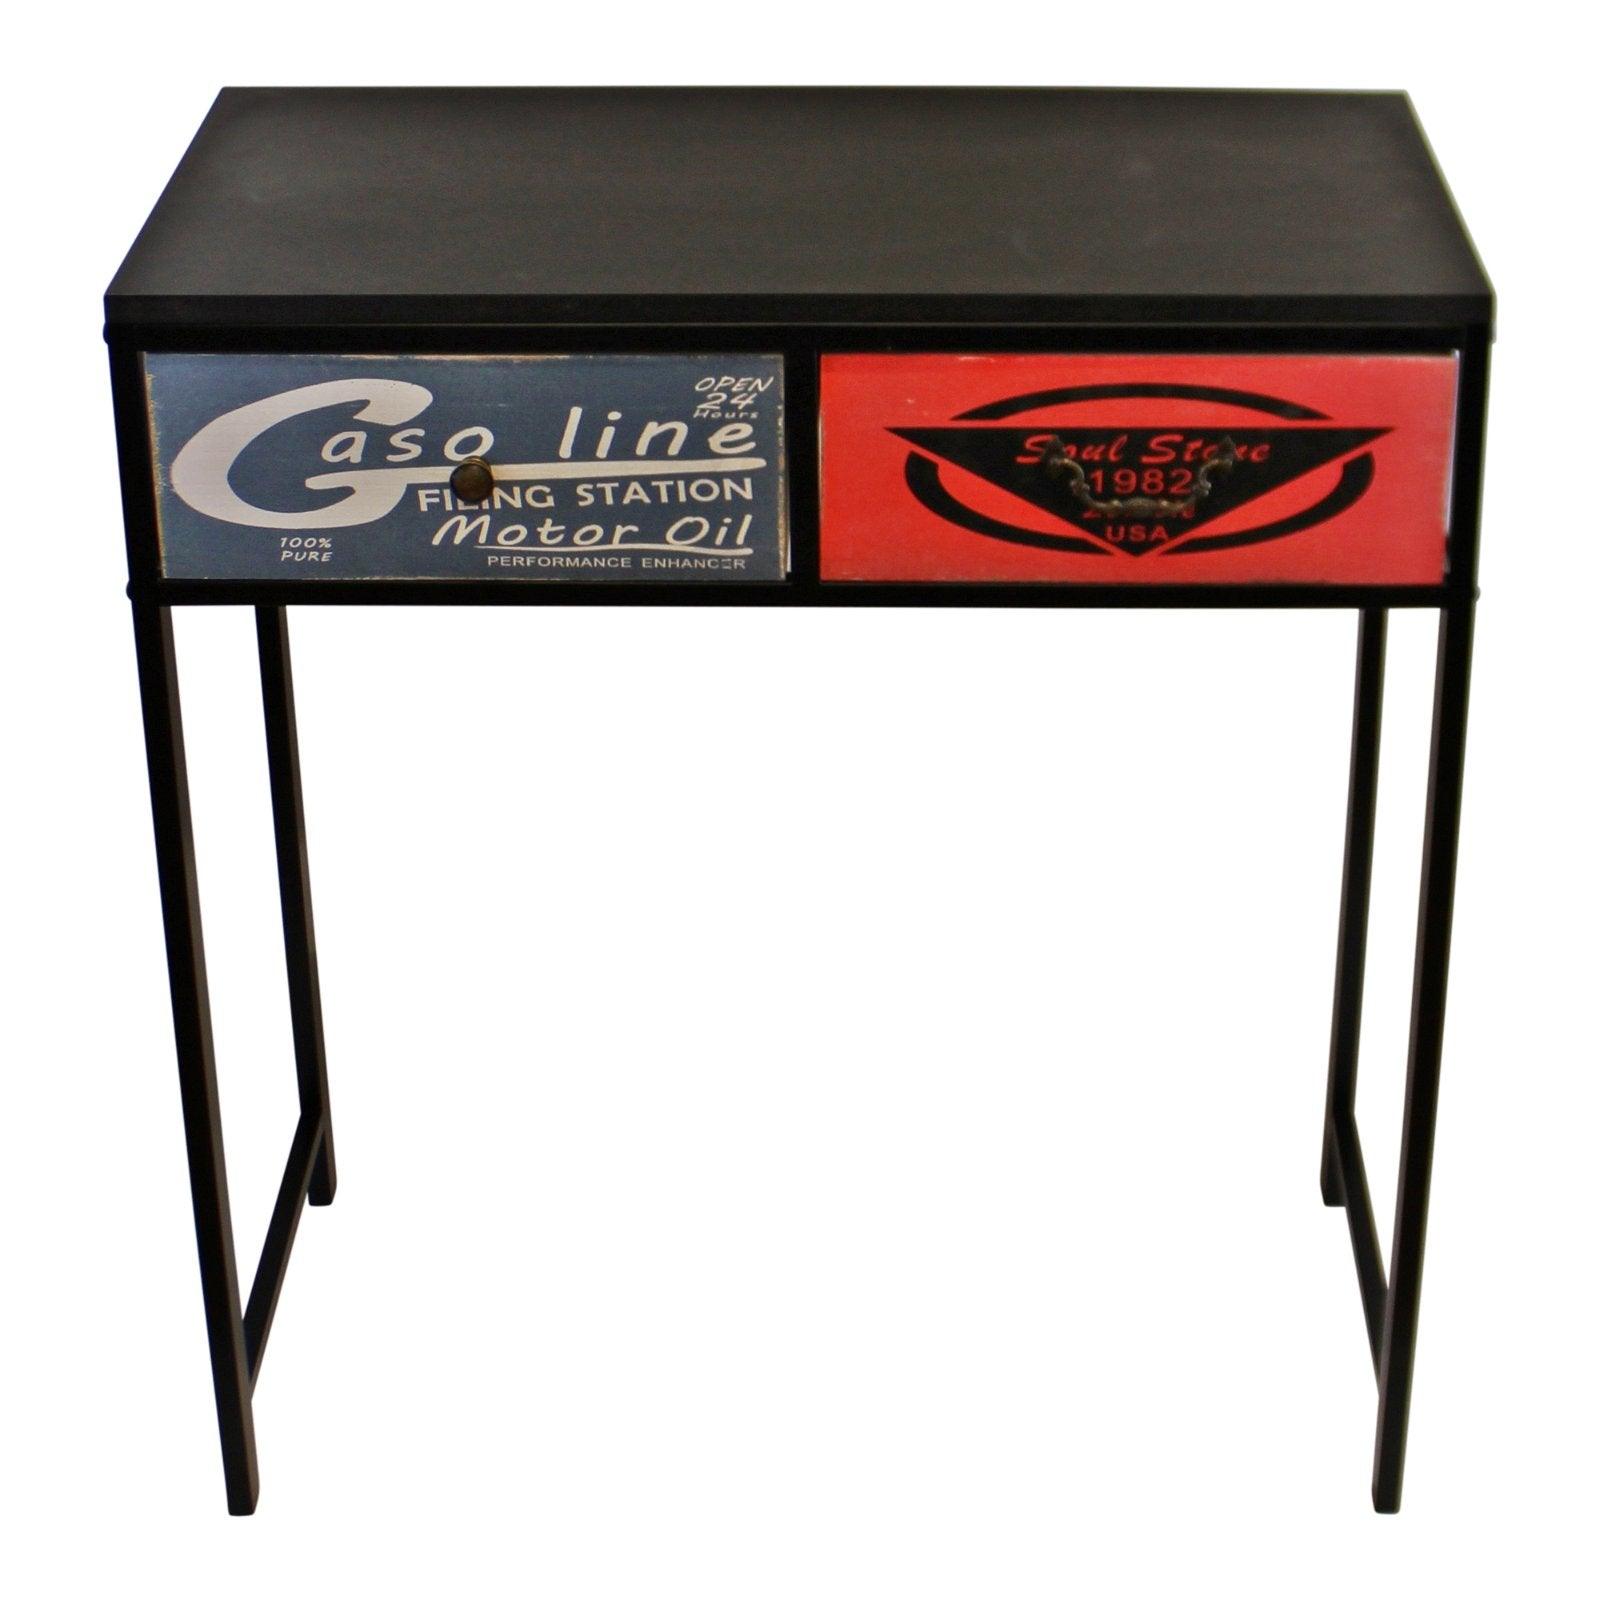 View Black Console Table With 2 Drawers Retro Design To Drawers information